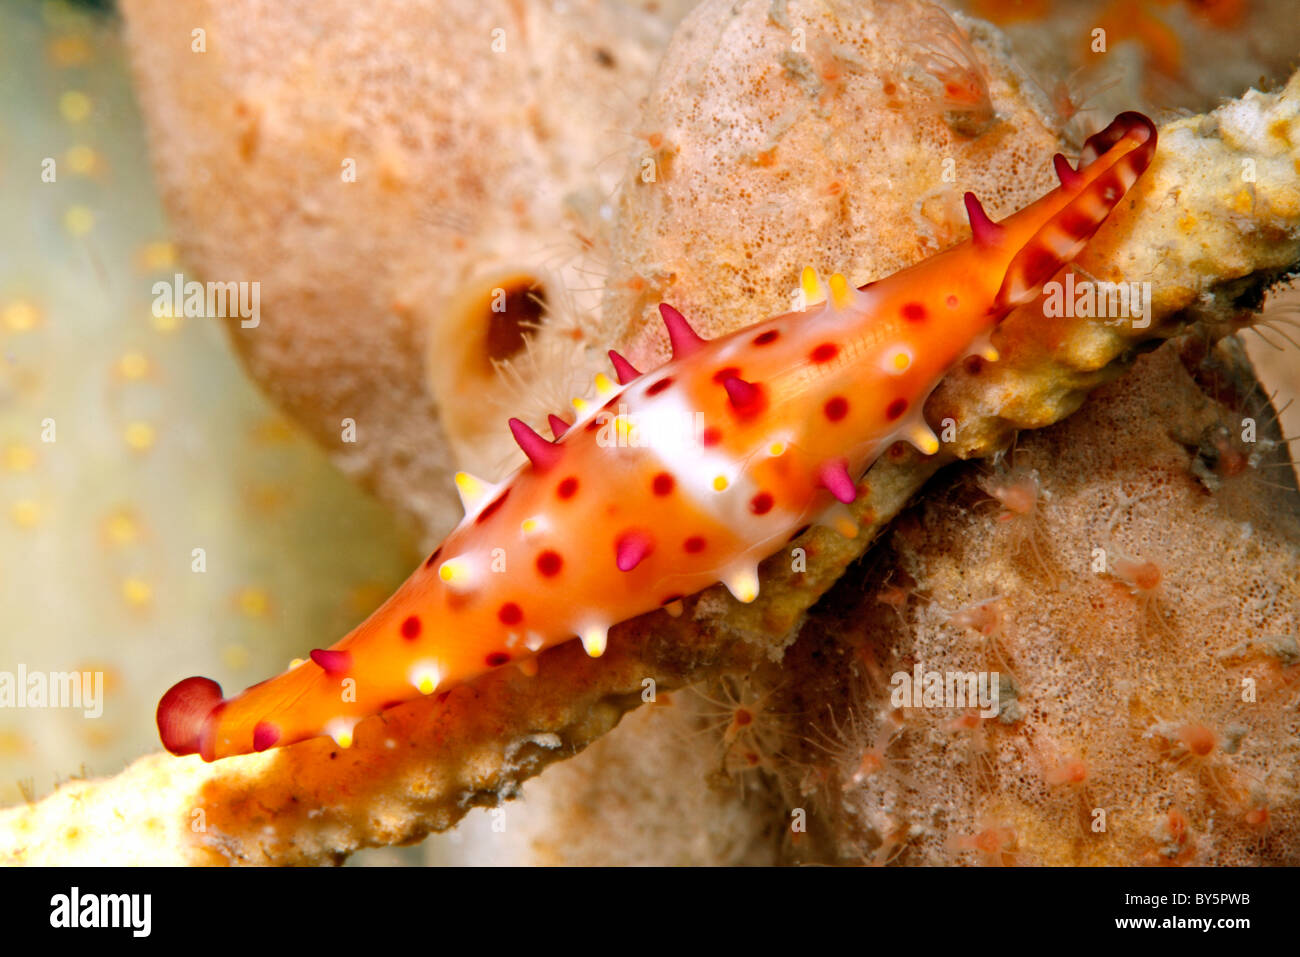 Rosy Spindle Cowry, or Ovulid, Phenacovolva rosea. Stock Photo